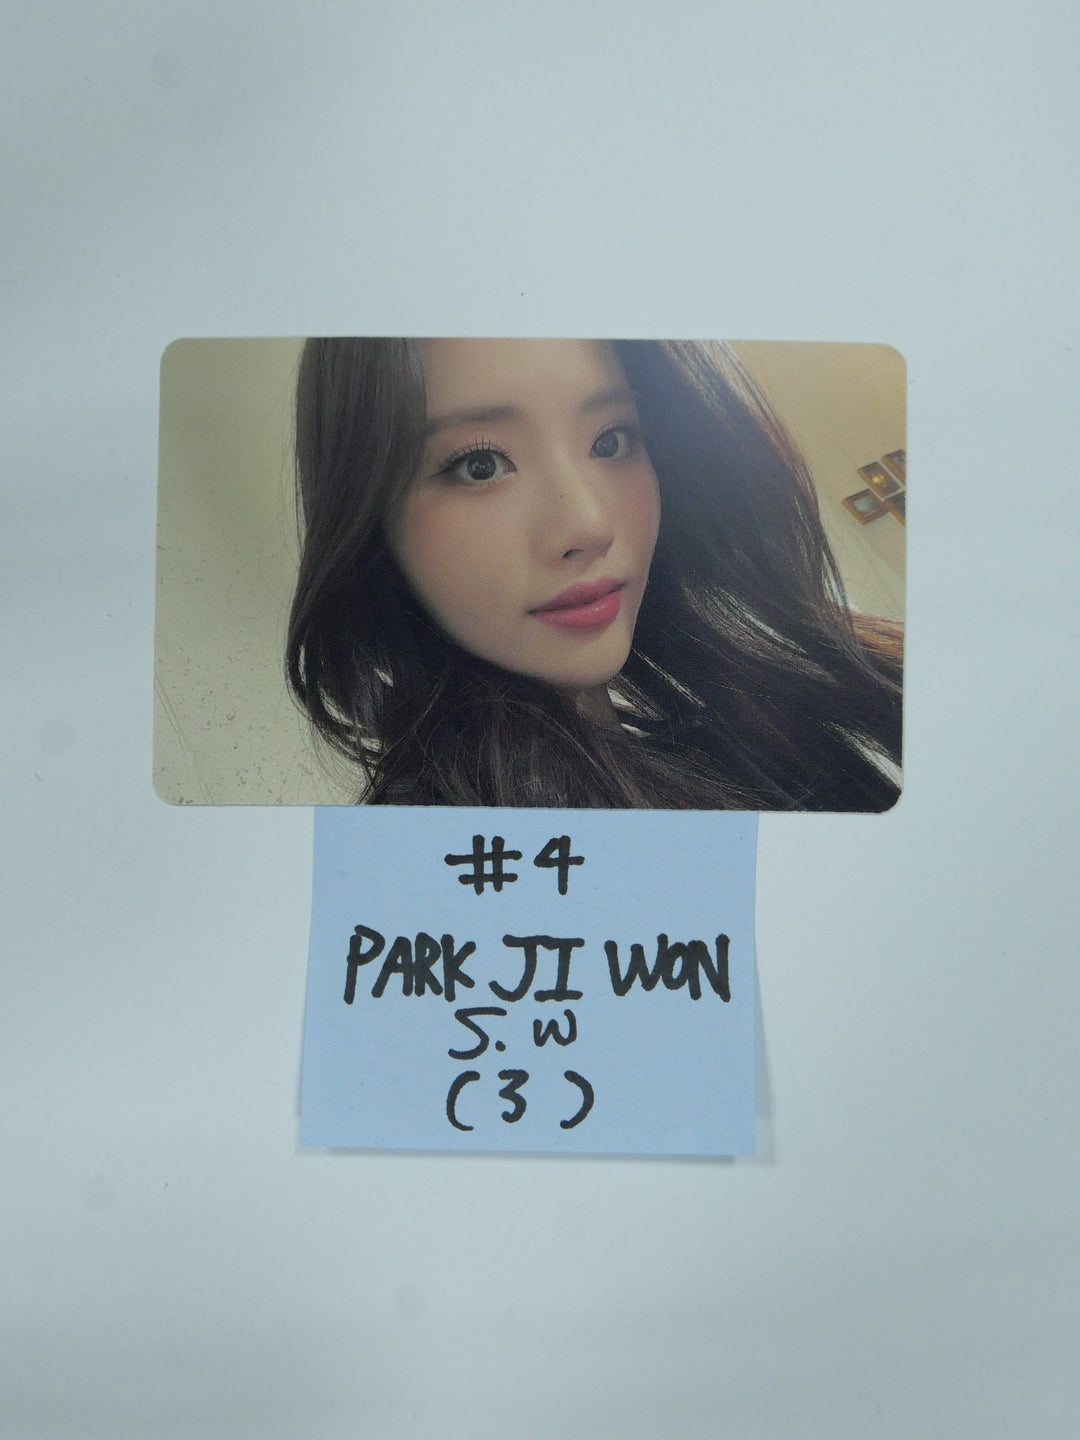 Fromis_9 "Midnight Guest" - Soundwave Luckydraw Photocard Round 2